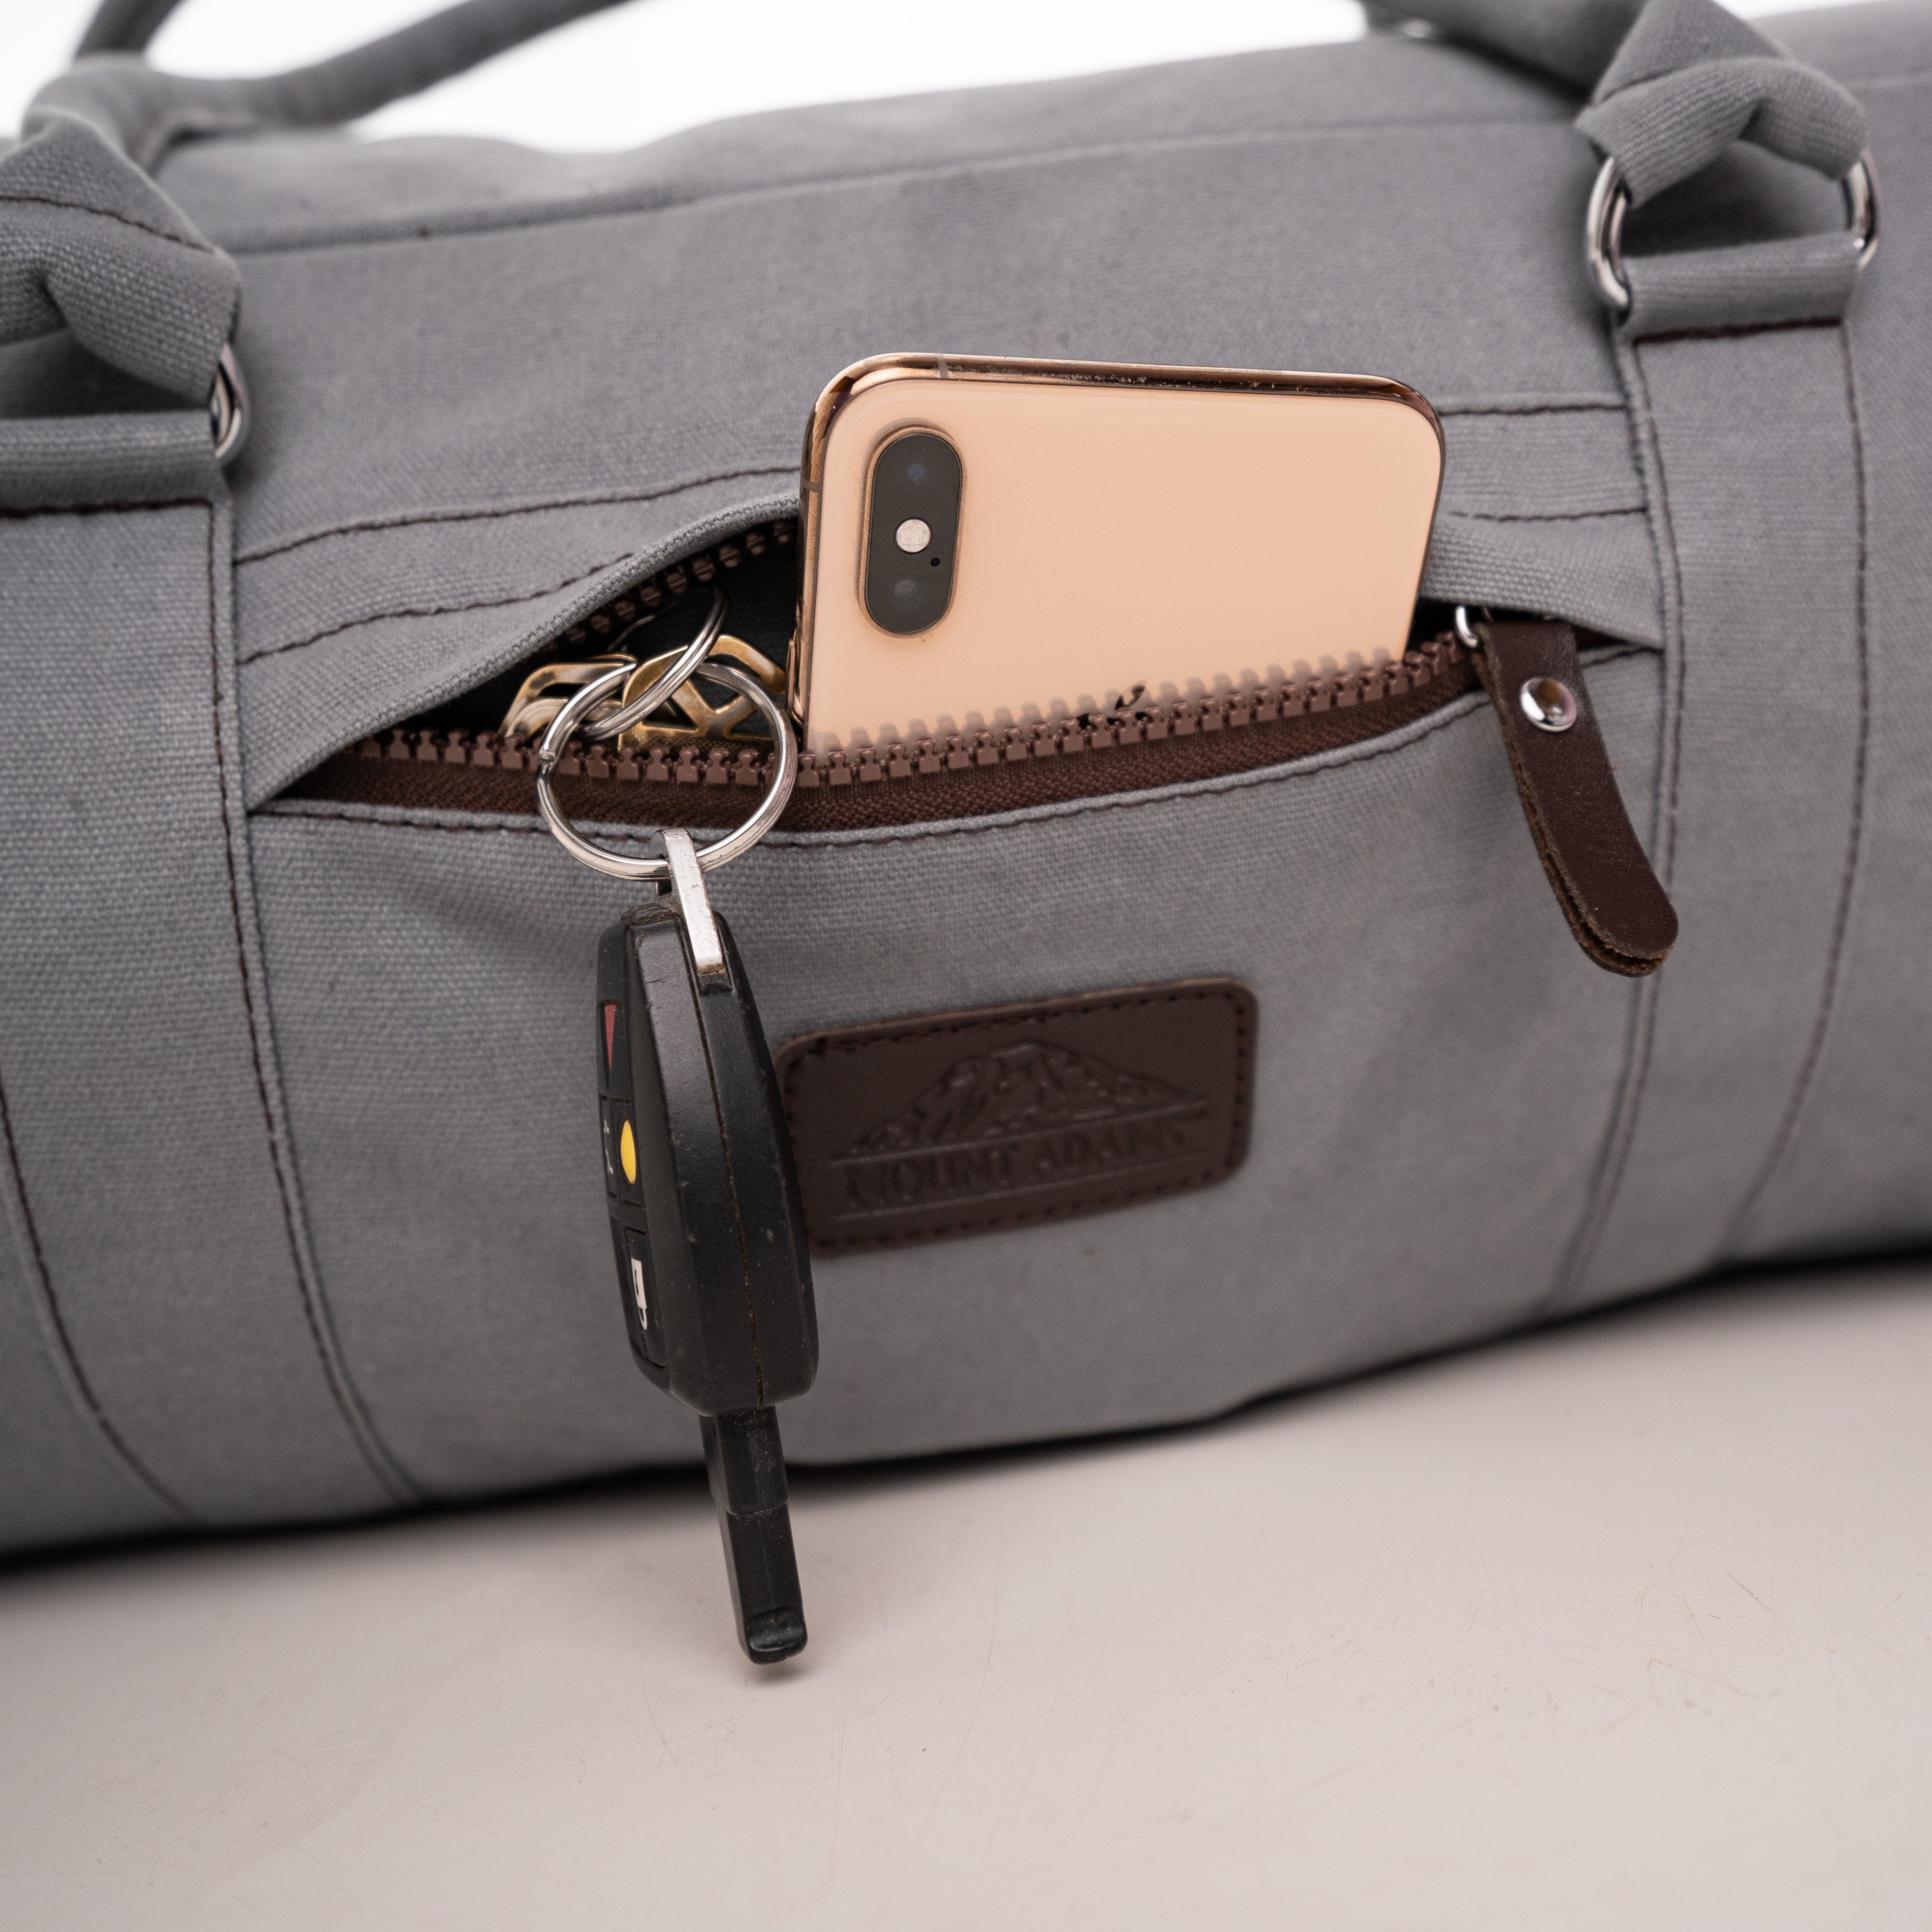 gray duffle bag with exterior pocket for phone and keys